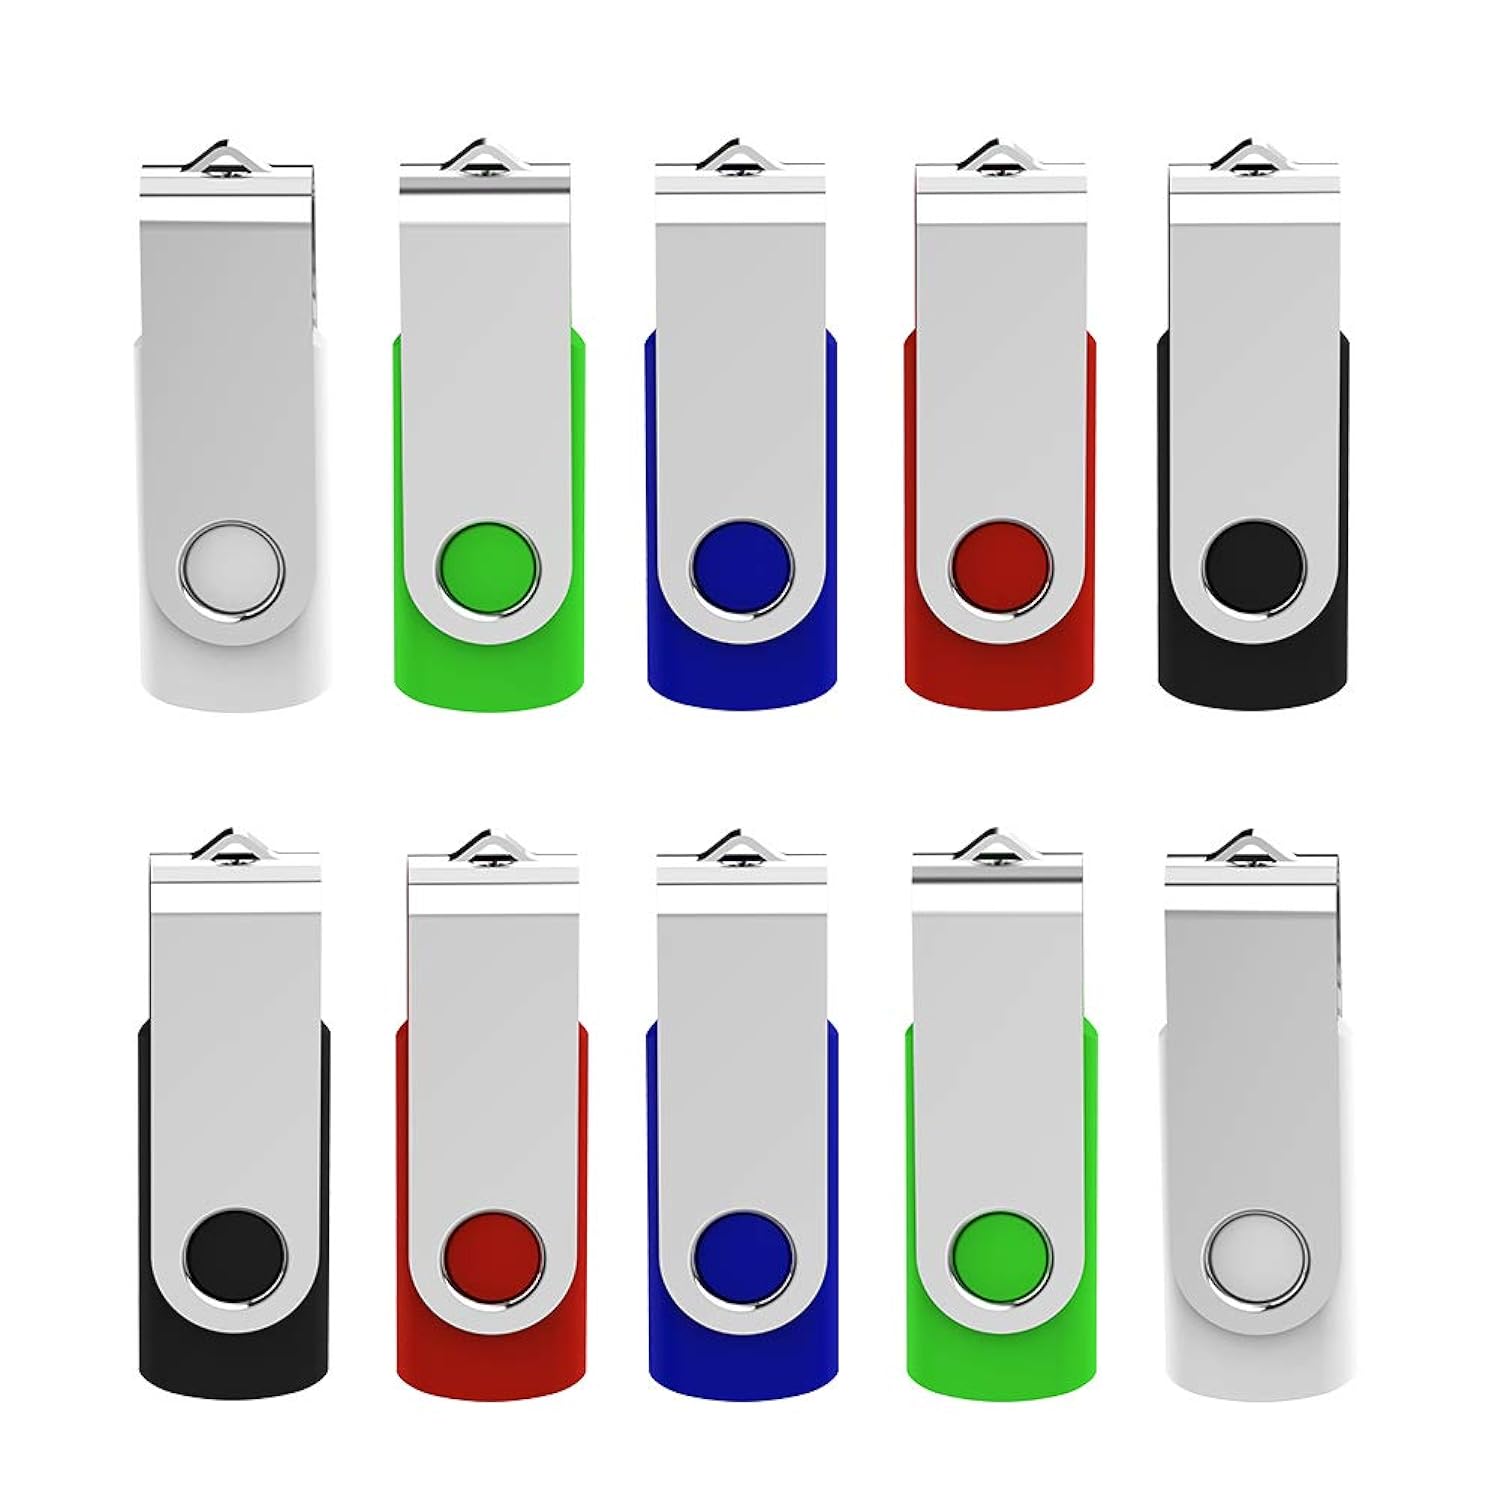 Great Choice Products 16Gb Flash Drive 10 Pack Usb Flash Drive 16 Gb Thumb Drive Memory Stick Zip Drive Usb 2.0, 5 Colors (Black, Blue, Green, Whit…